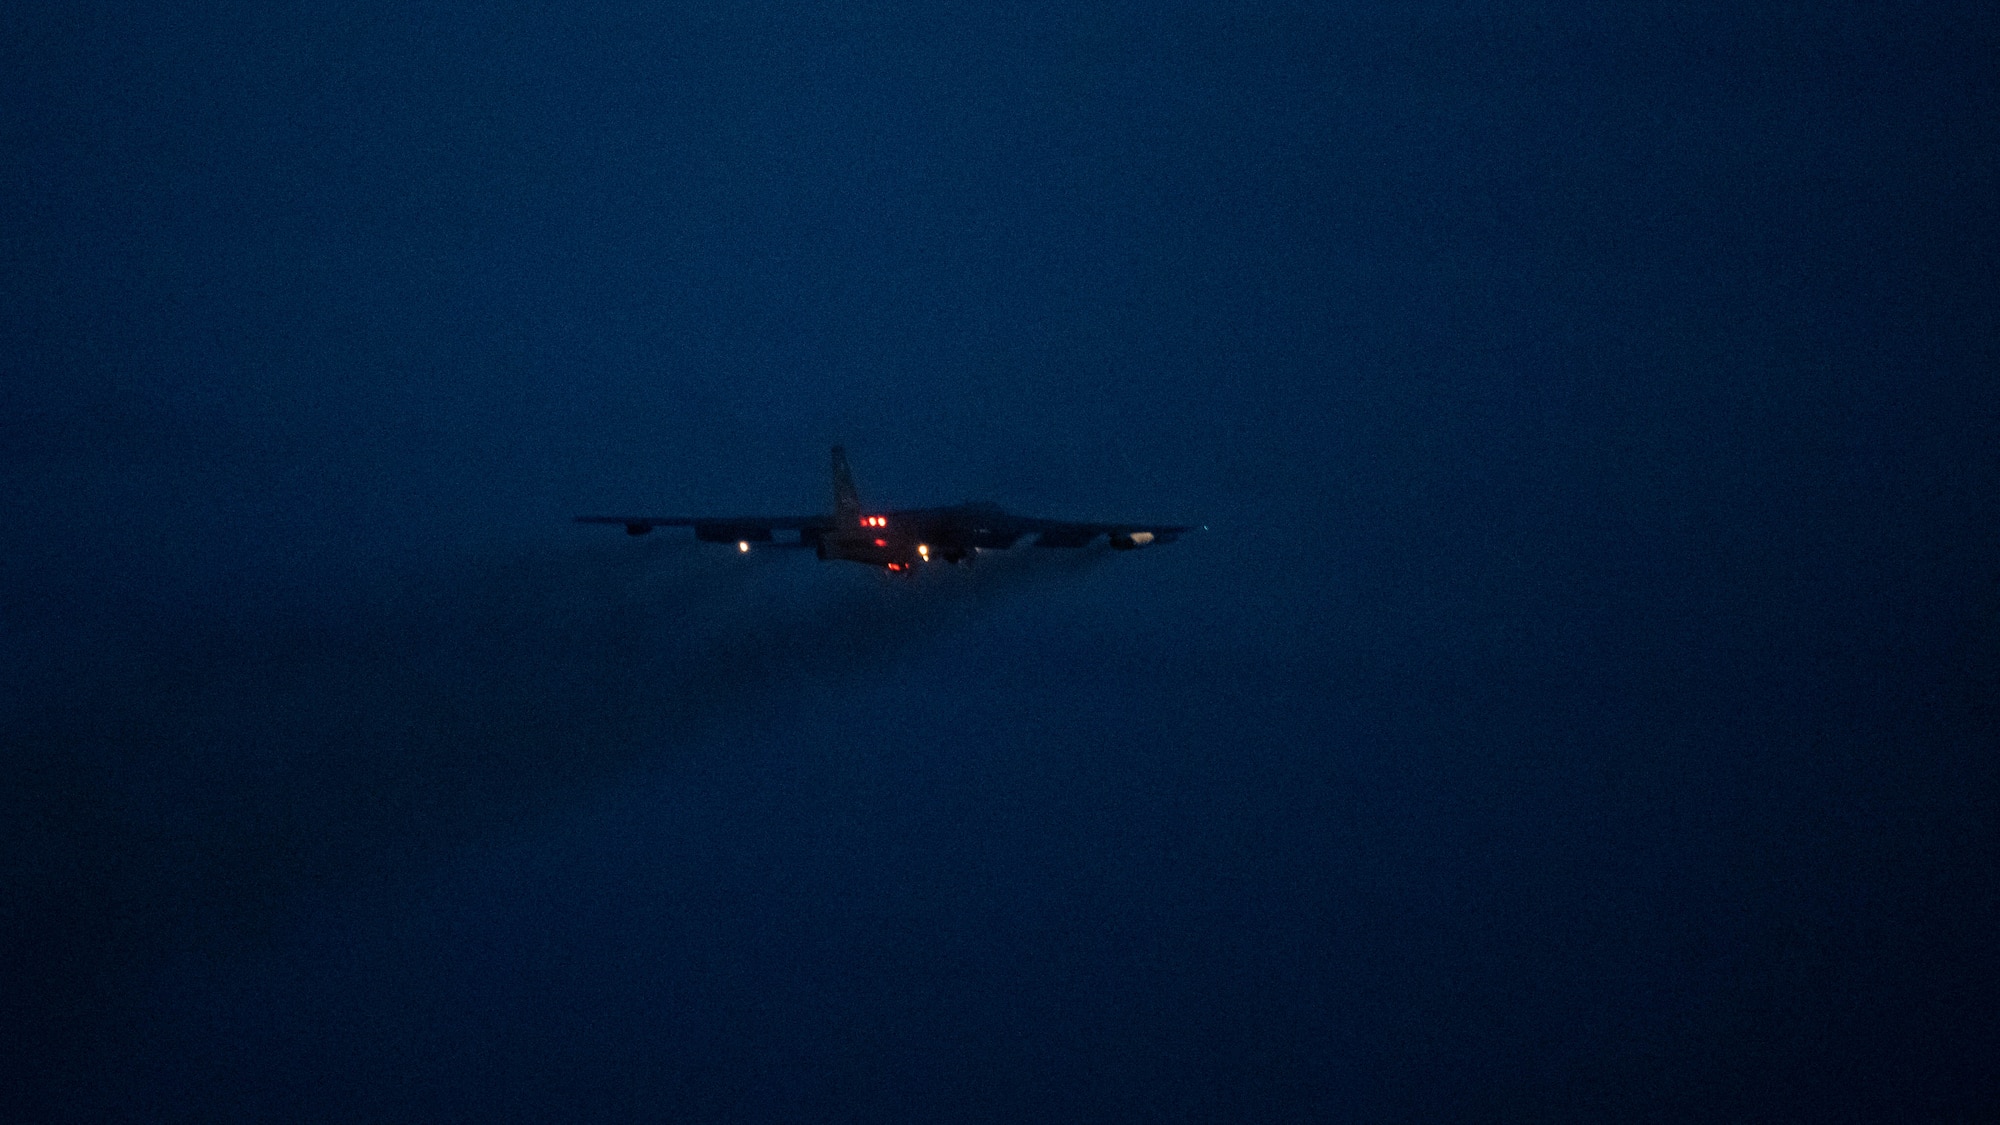 A B-52H Stratofortress takes off from Barksdale Air Force Base, Louisiana, May 16, 2021. The bomber is capable of flying at high subsonic speeds at altitudes up to 50,000 feet (15,166.6 meters). It can carry nuclear or precision guided conventional ordnance with worldwide precision navigation capability. (U.S. Air Force photo by Senior Airman Jacob B. Wrightsman)